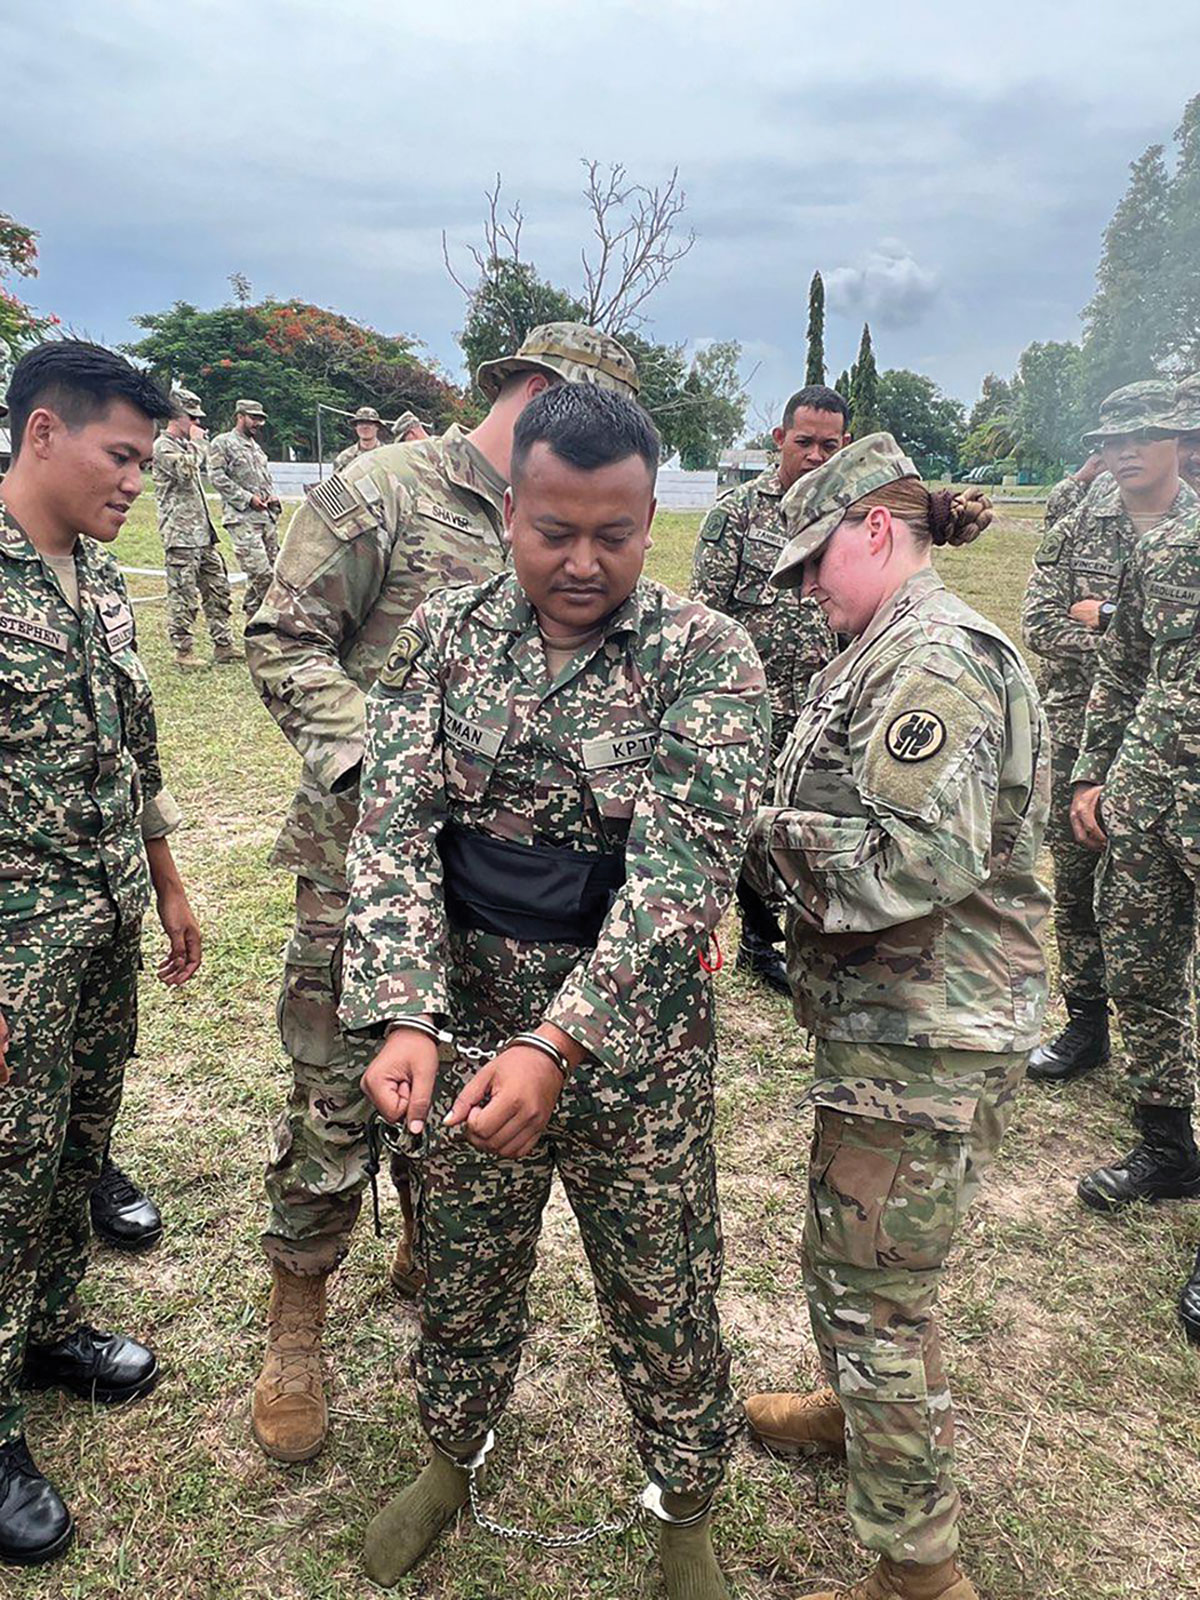 Spcs. Kelly Klarissa and Jedidah Shaver of the 493rd Military Police Company teach a restraints course during the subject-matter expert exchange portion of Keris Strike 2023, 14 July–9 August 2023, in Malaysia